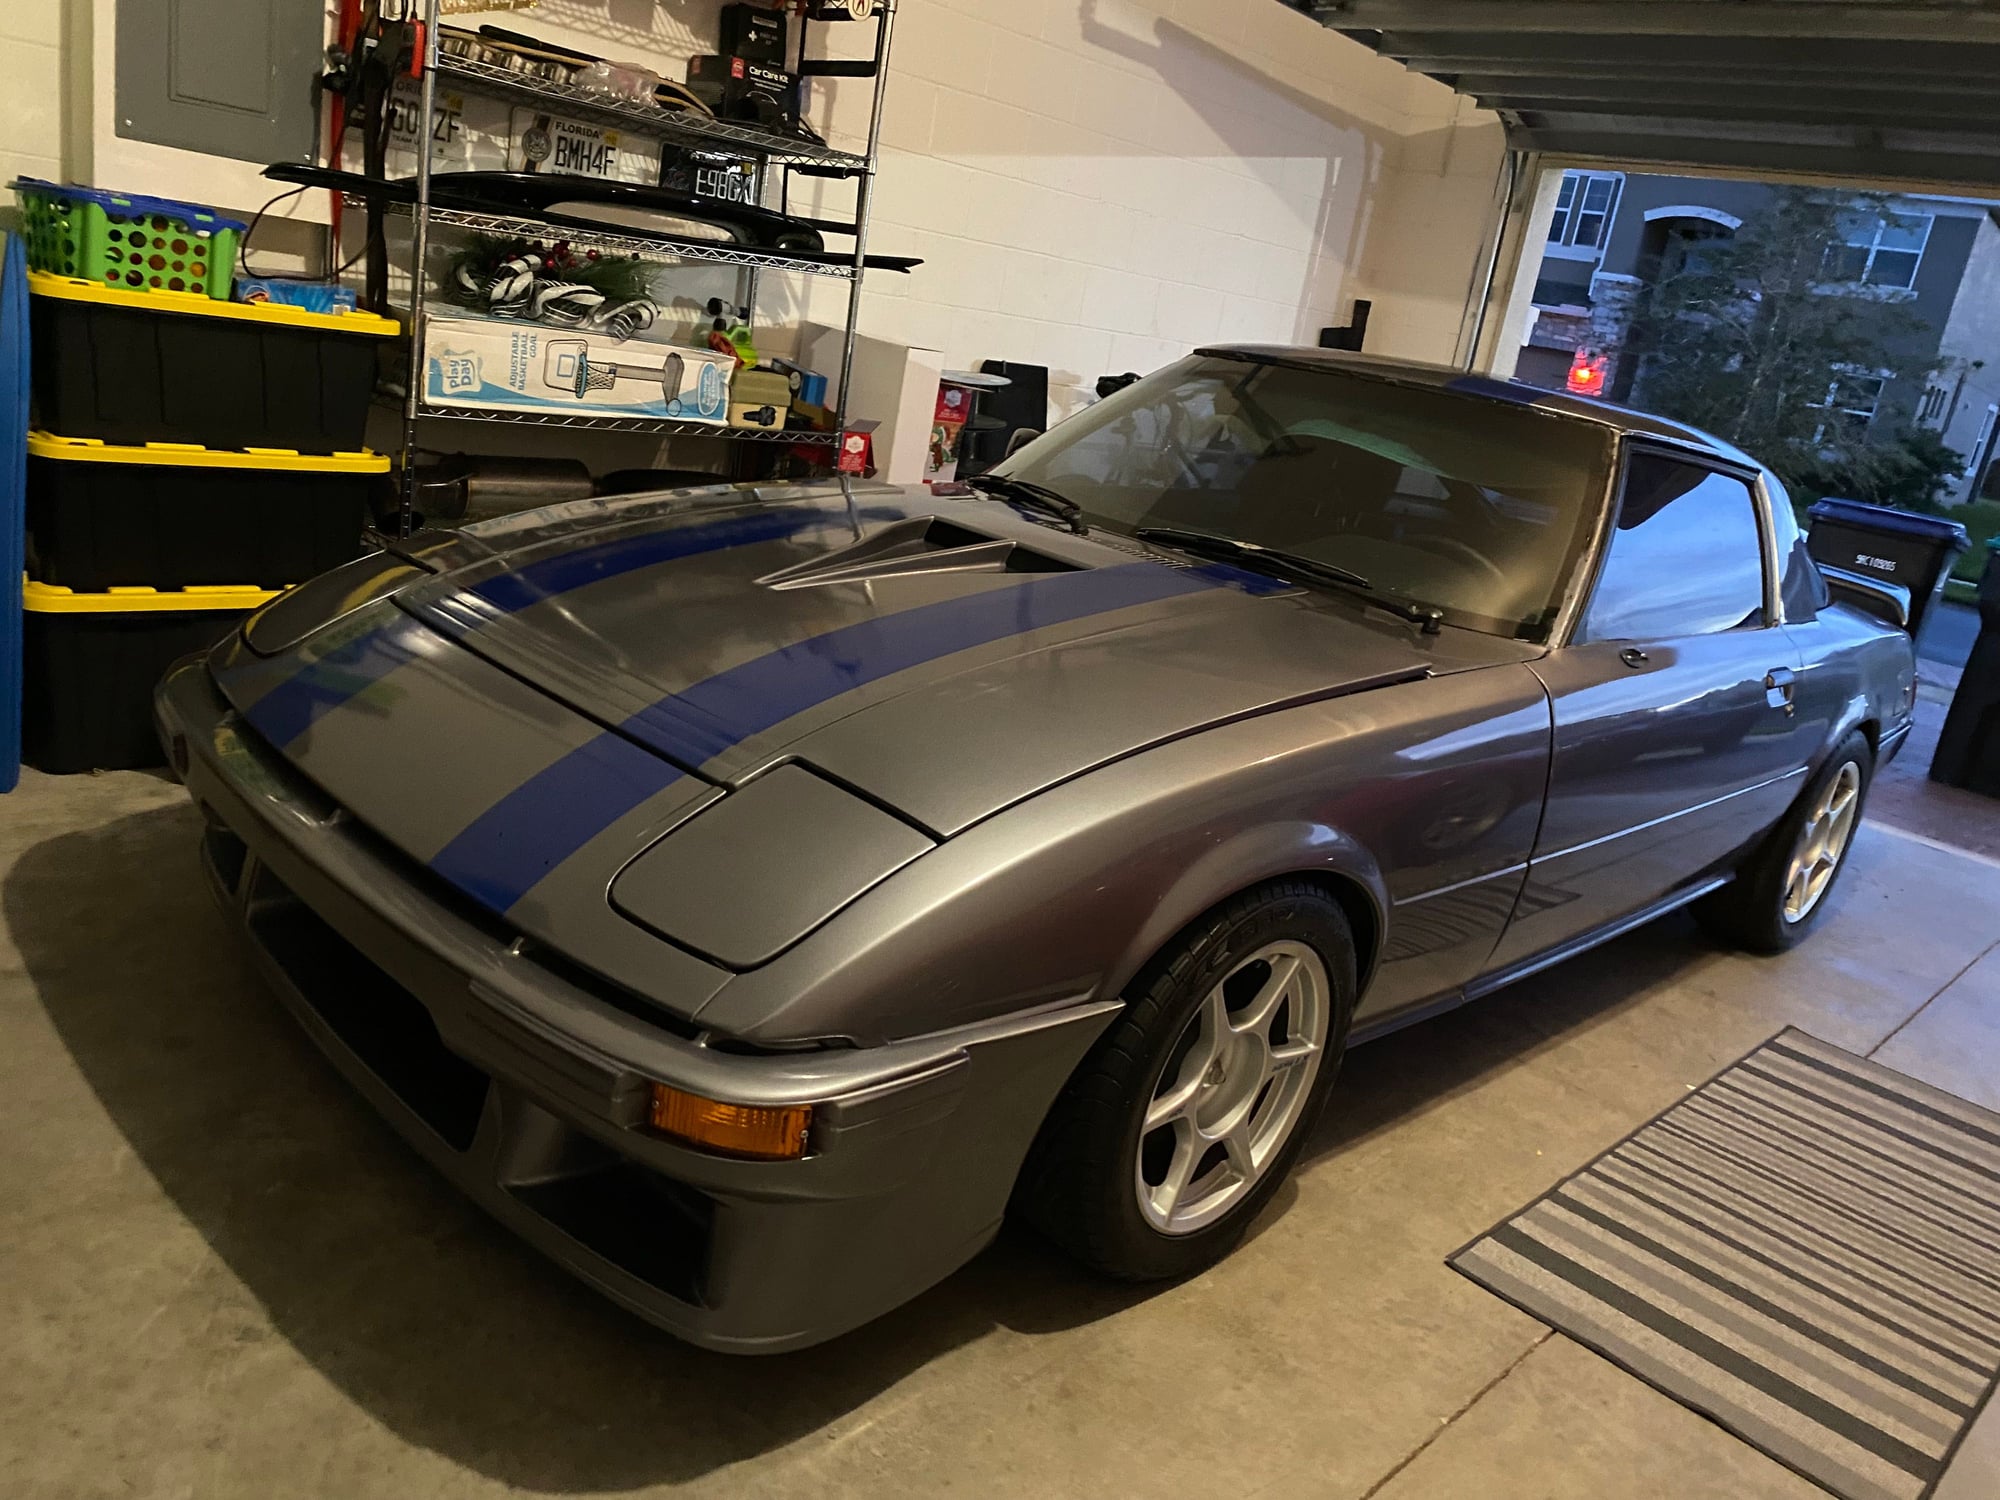 1979 Mazda RX-7 - 36yr -Family-Owned Modified Mariah Motorsports MODE 4 1979 Mazda RX-7 5-Speed - Used - VIN SA22C516898 - 32,146 Miles - Other - 2WD - Manual - Coupe - Gray - Winter Springs, FL 32708, United States